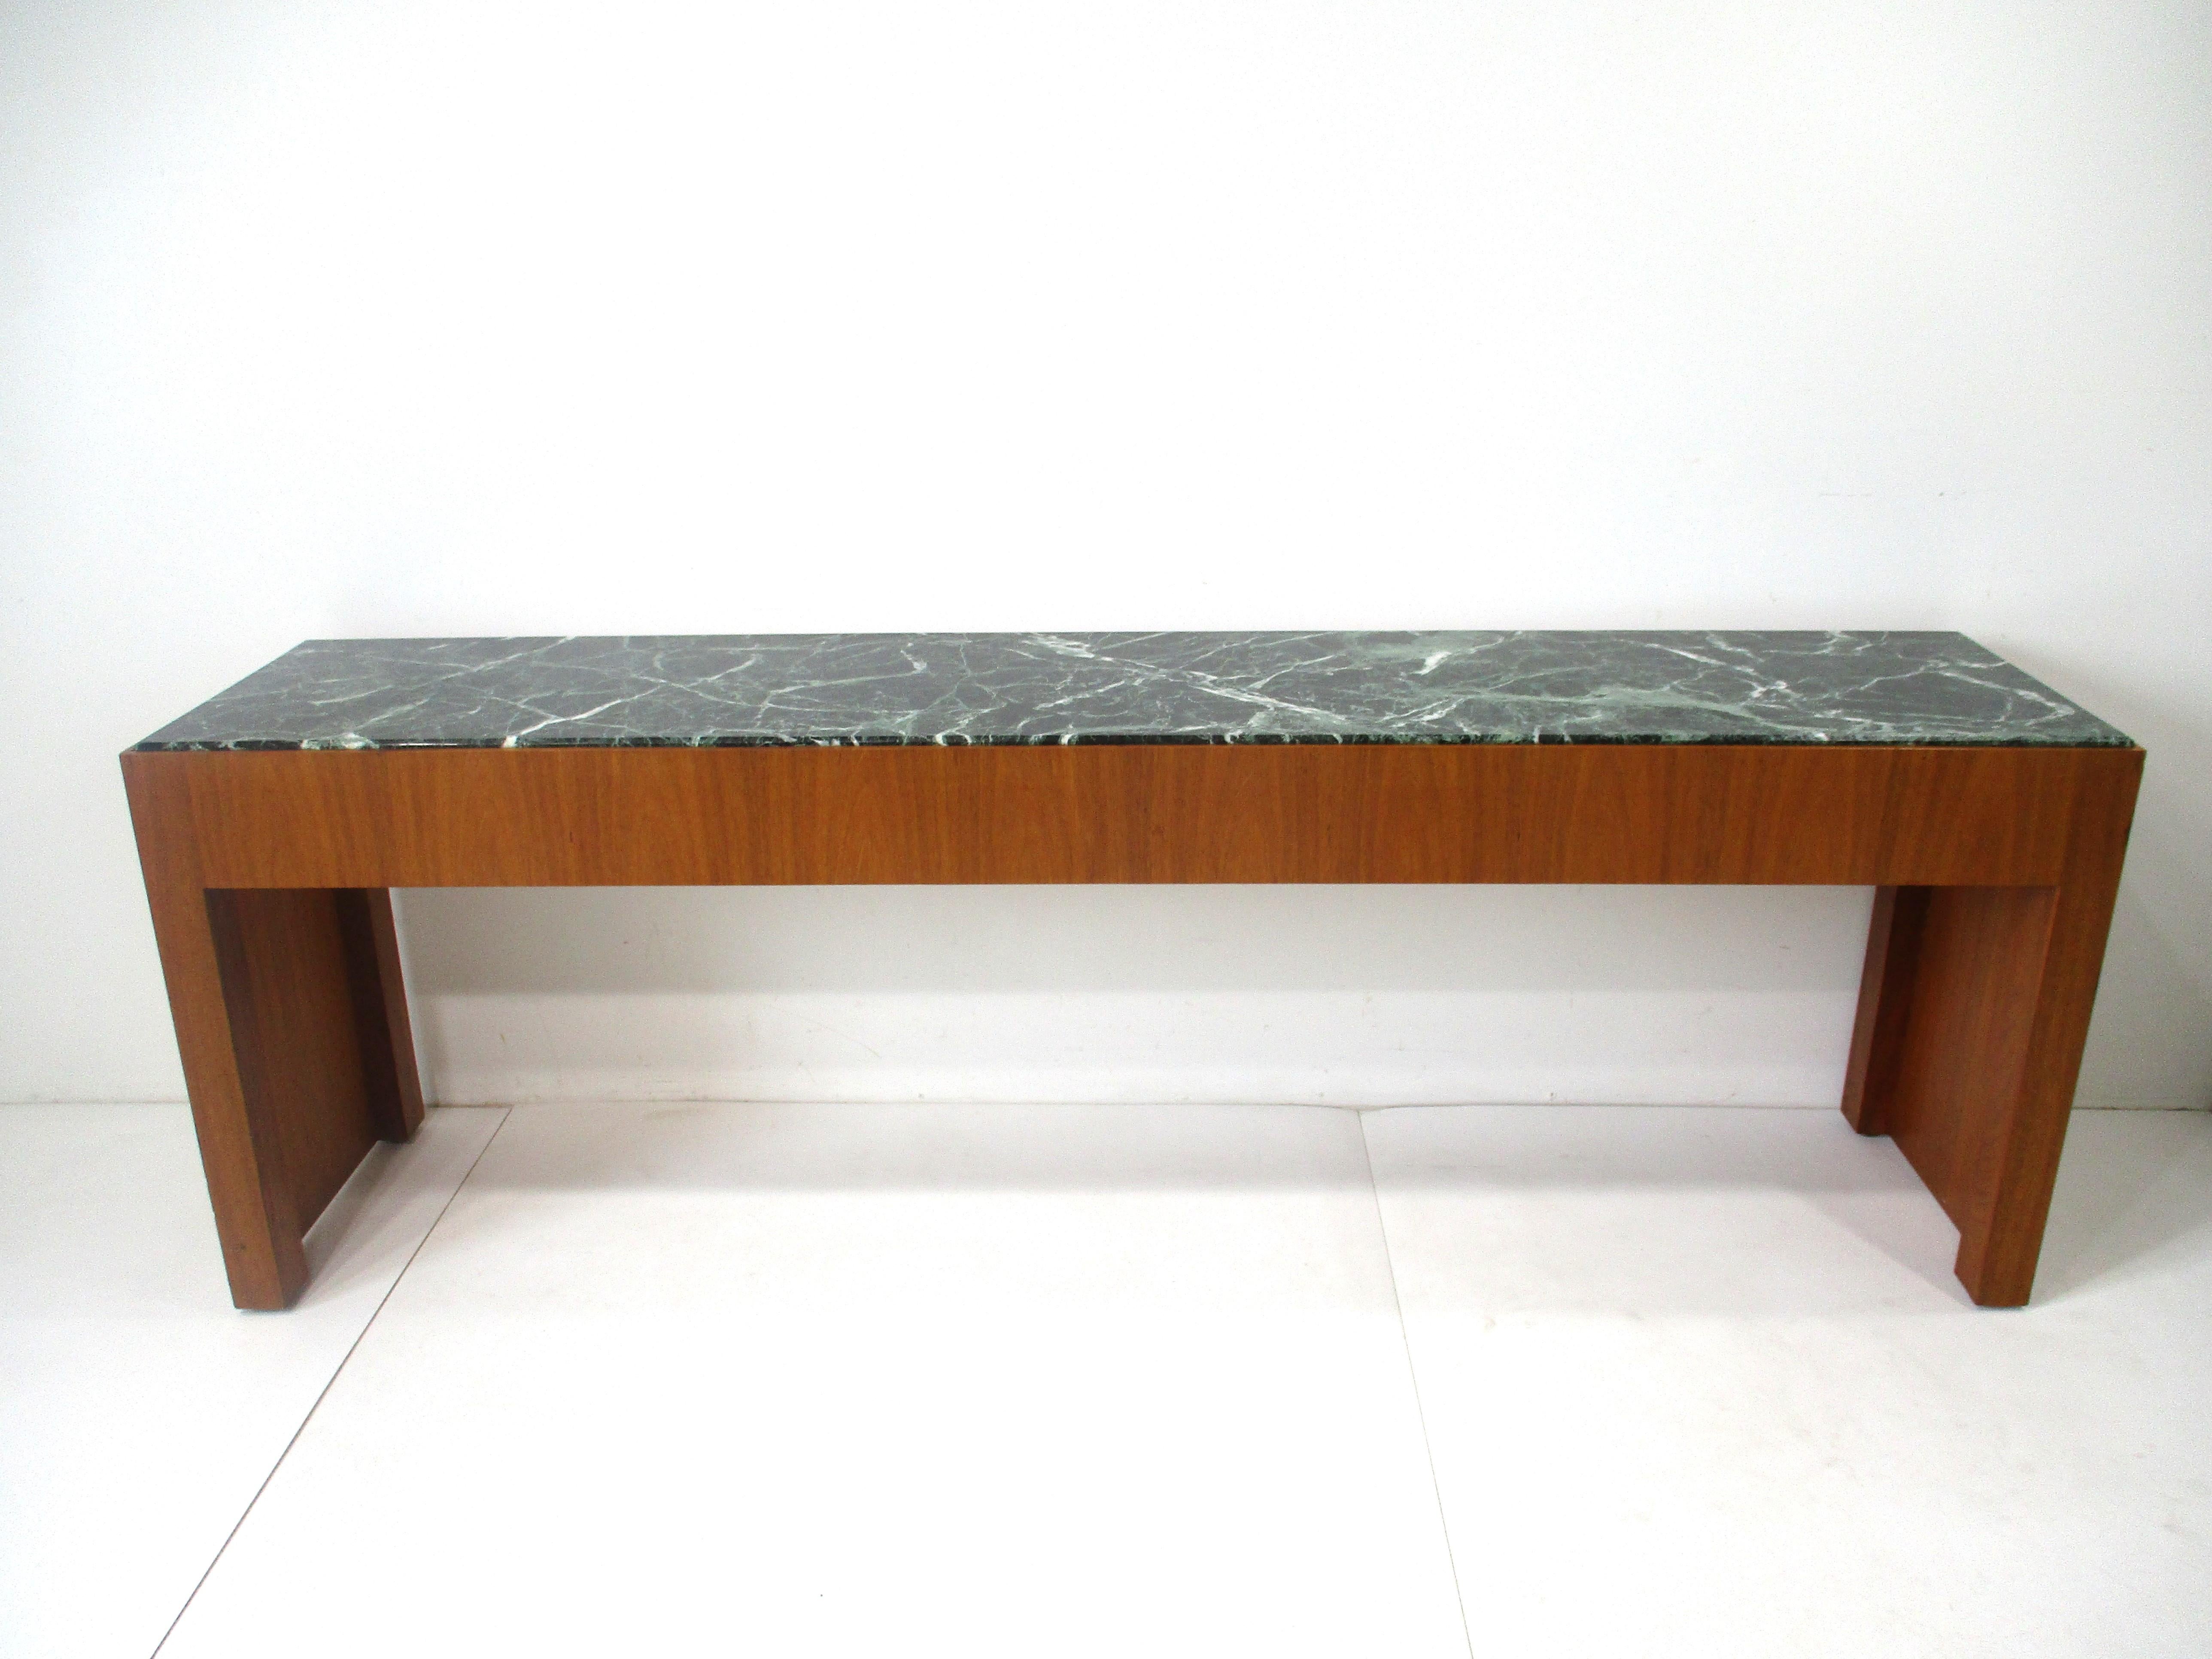 A very well crafted walnut based console table with a dark green and veined beveled edged inset marble top . The one side has a pull out drawer for smalls if used in an entrance way like keys and mail . This piece can be used in any interior or room